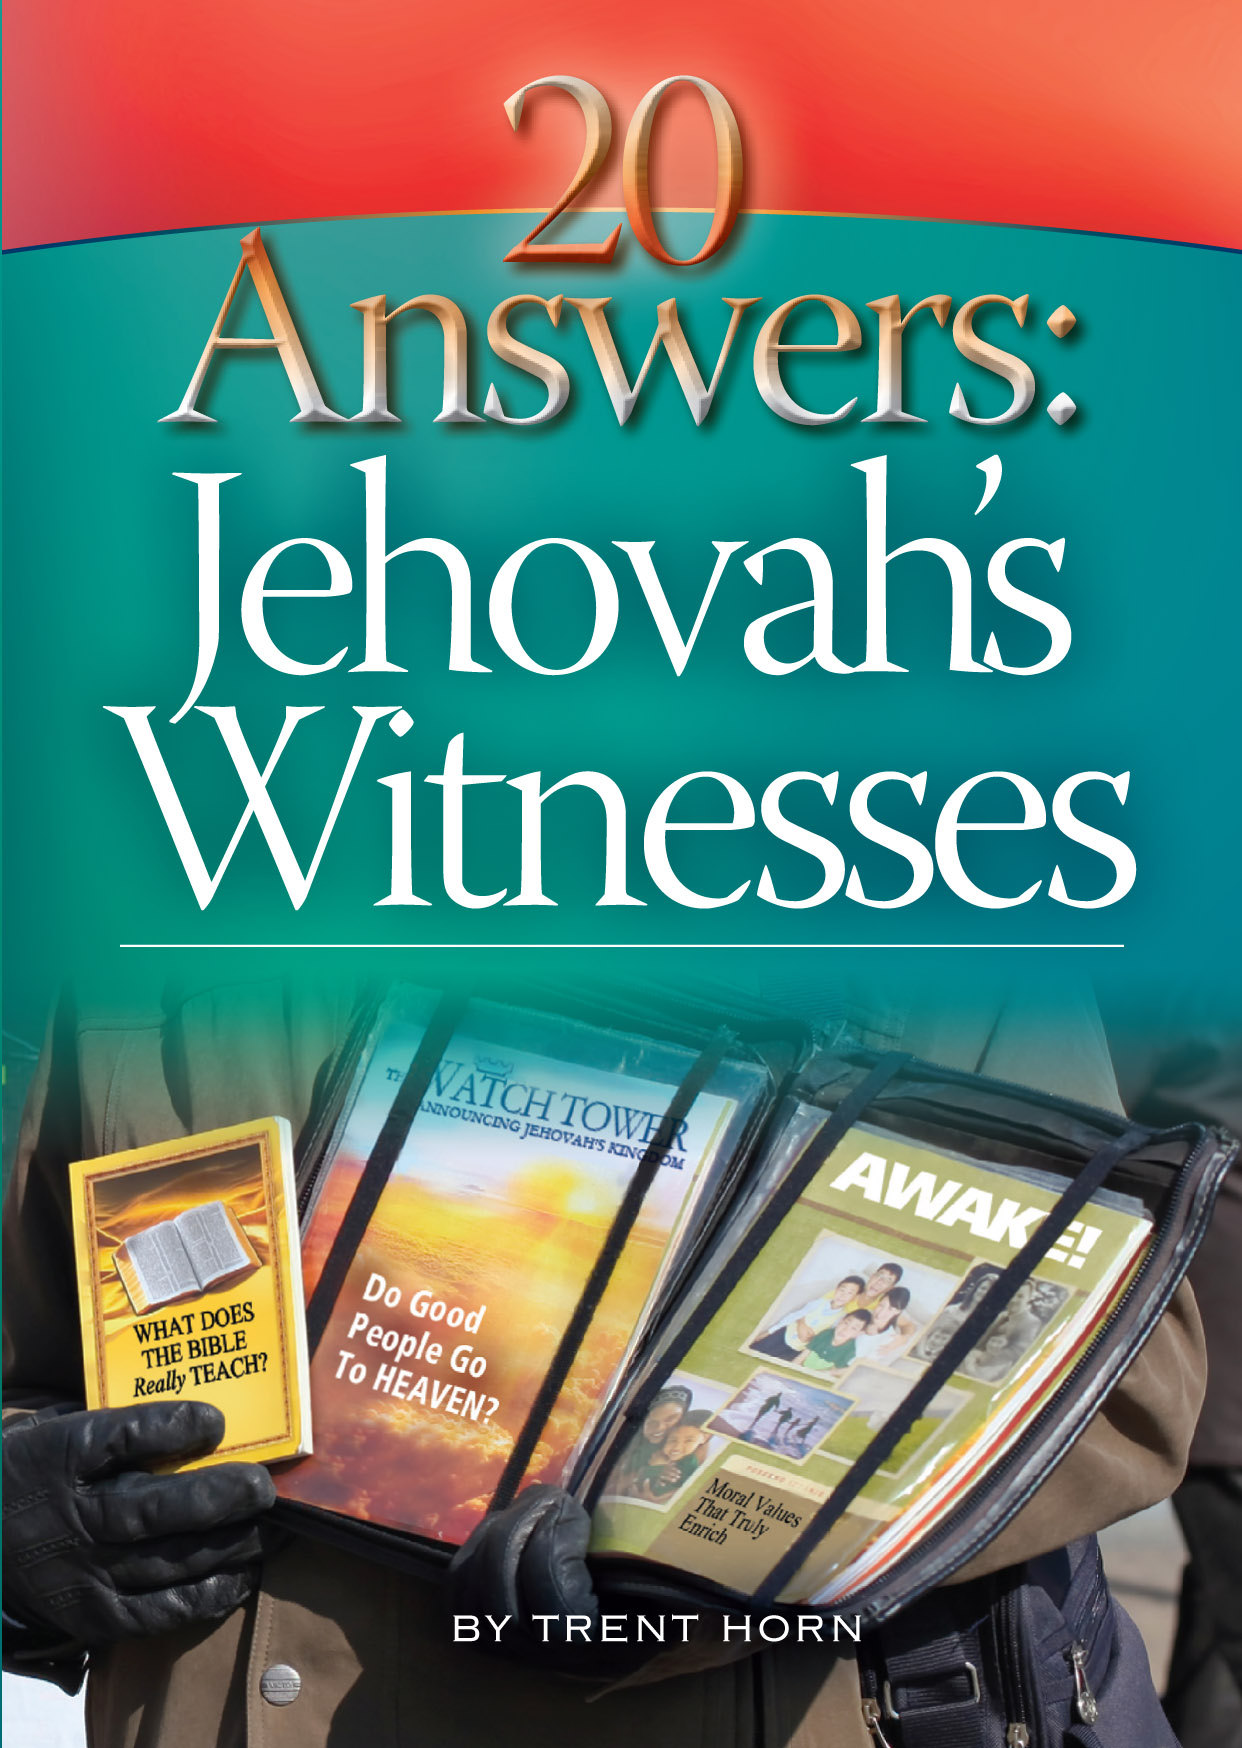 Jehovah's Witness Ministry Service / Meeting Bag